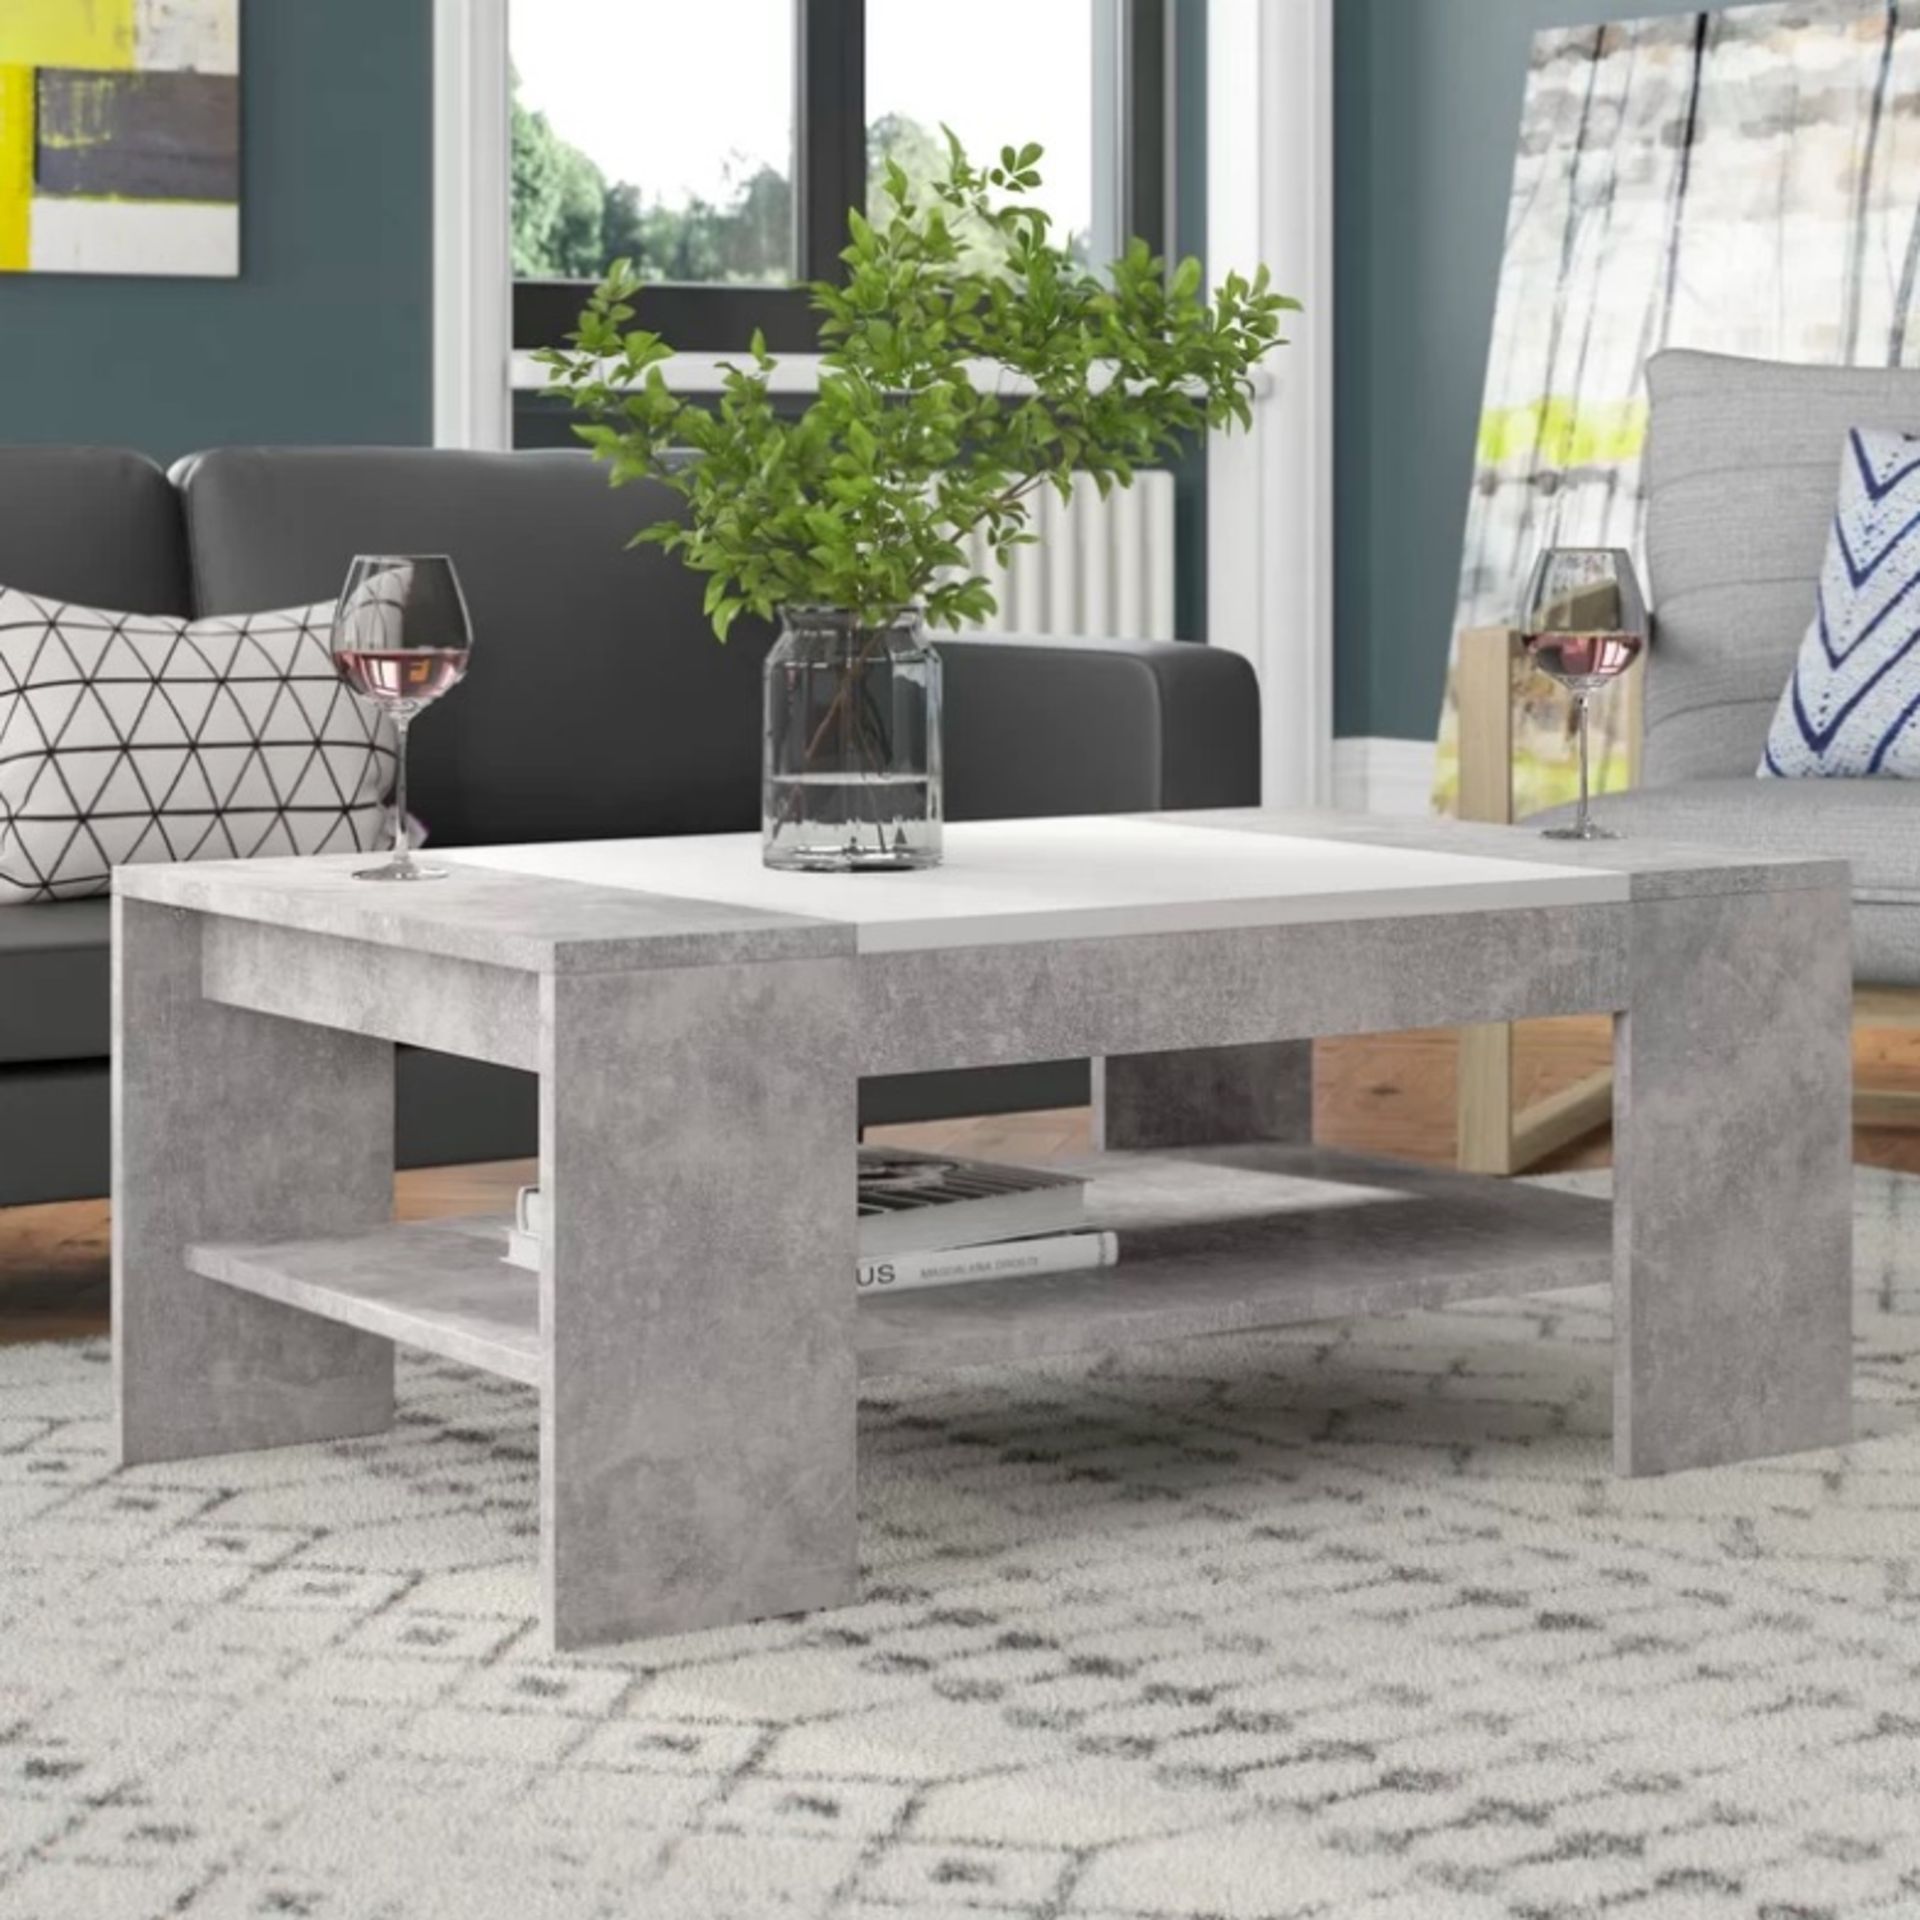 Grey & White Coffee Table Create A Streamlined Style Thatâ€™s Uniquely Yours Crafted From Premium